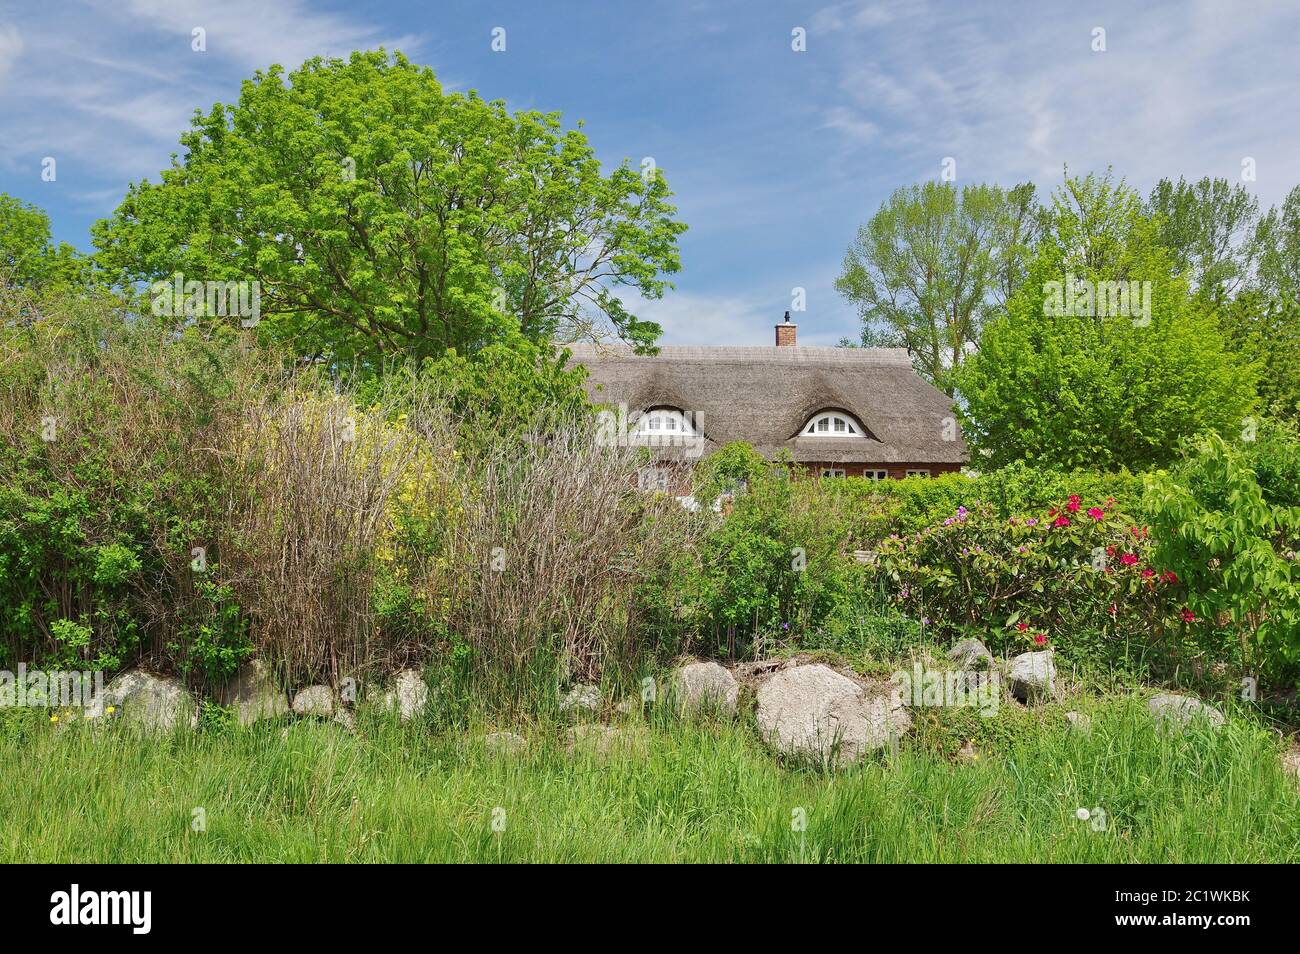 House with a thatched roof, GroÃŸ Stresow, Island of RÃ¼gen, Germany, West Europe Stock Photo